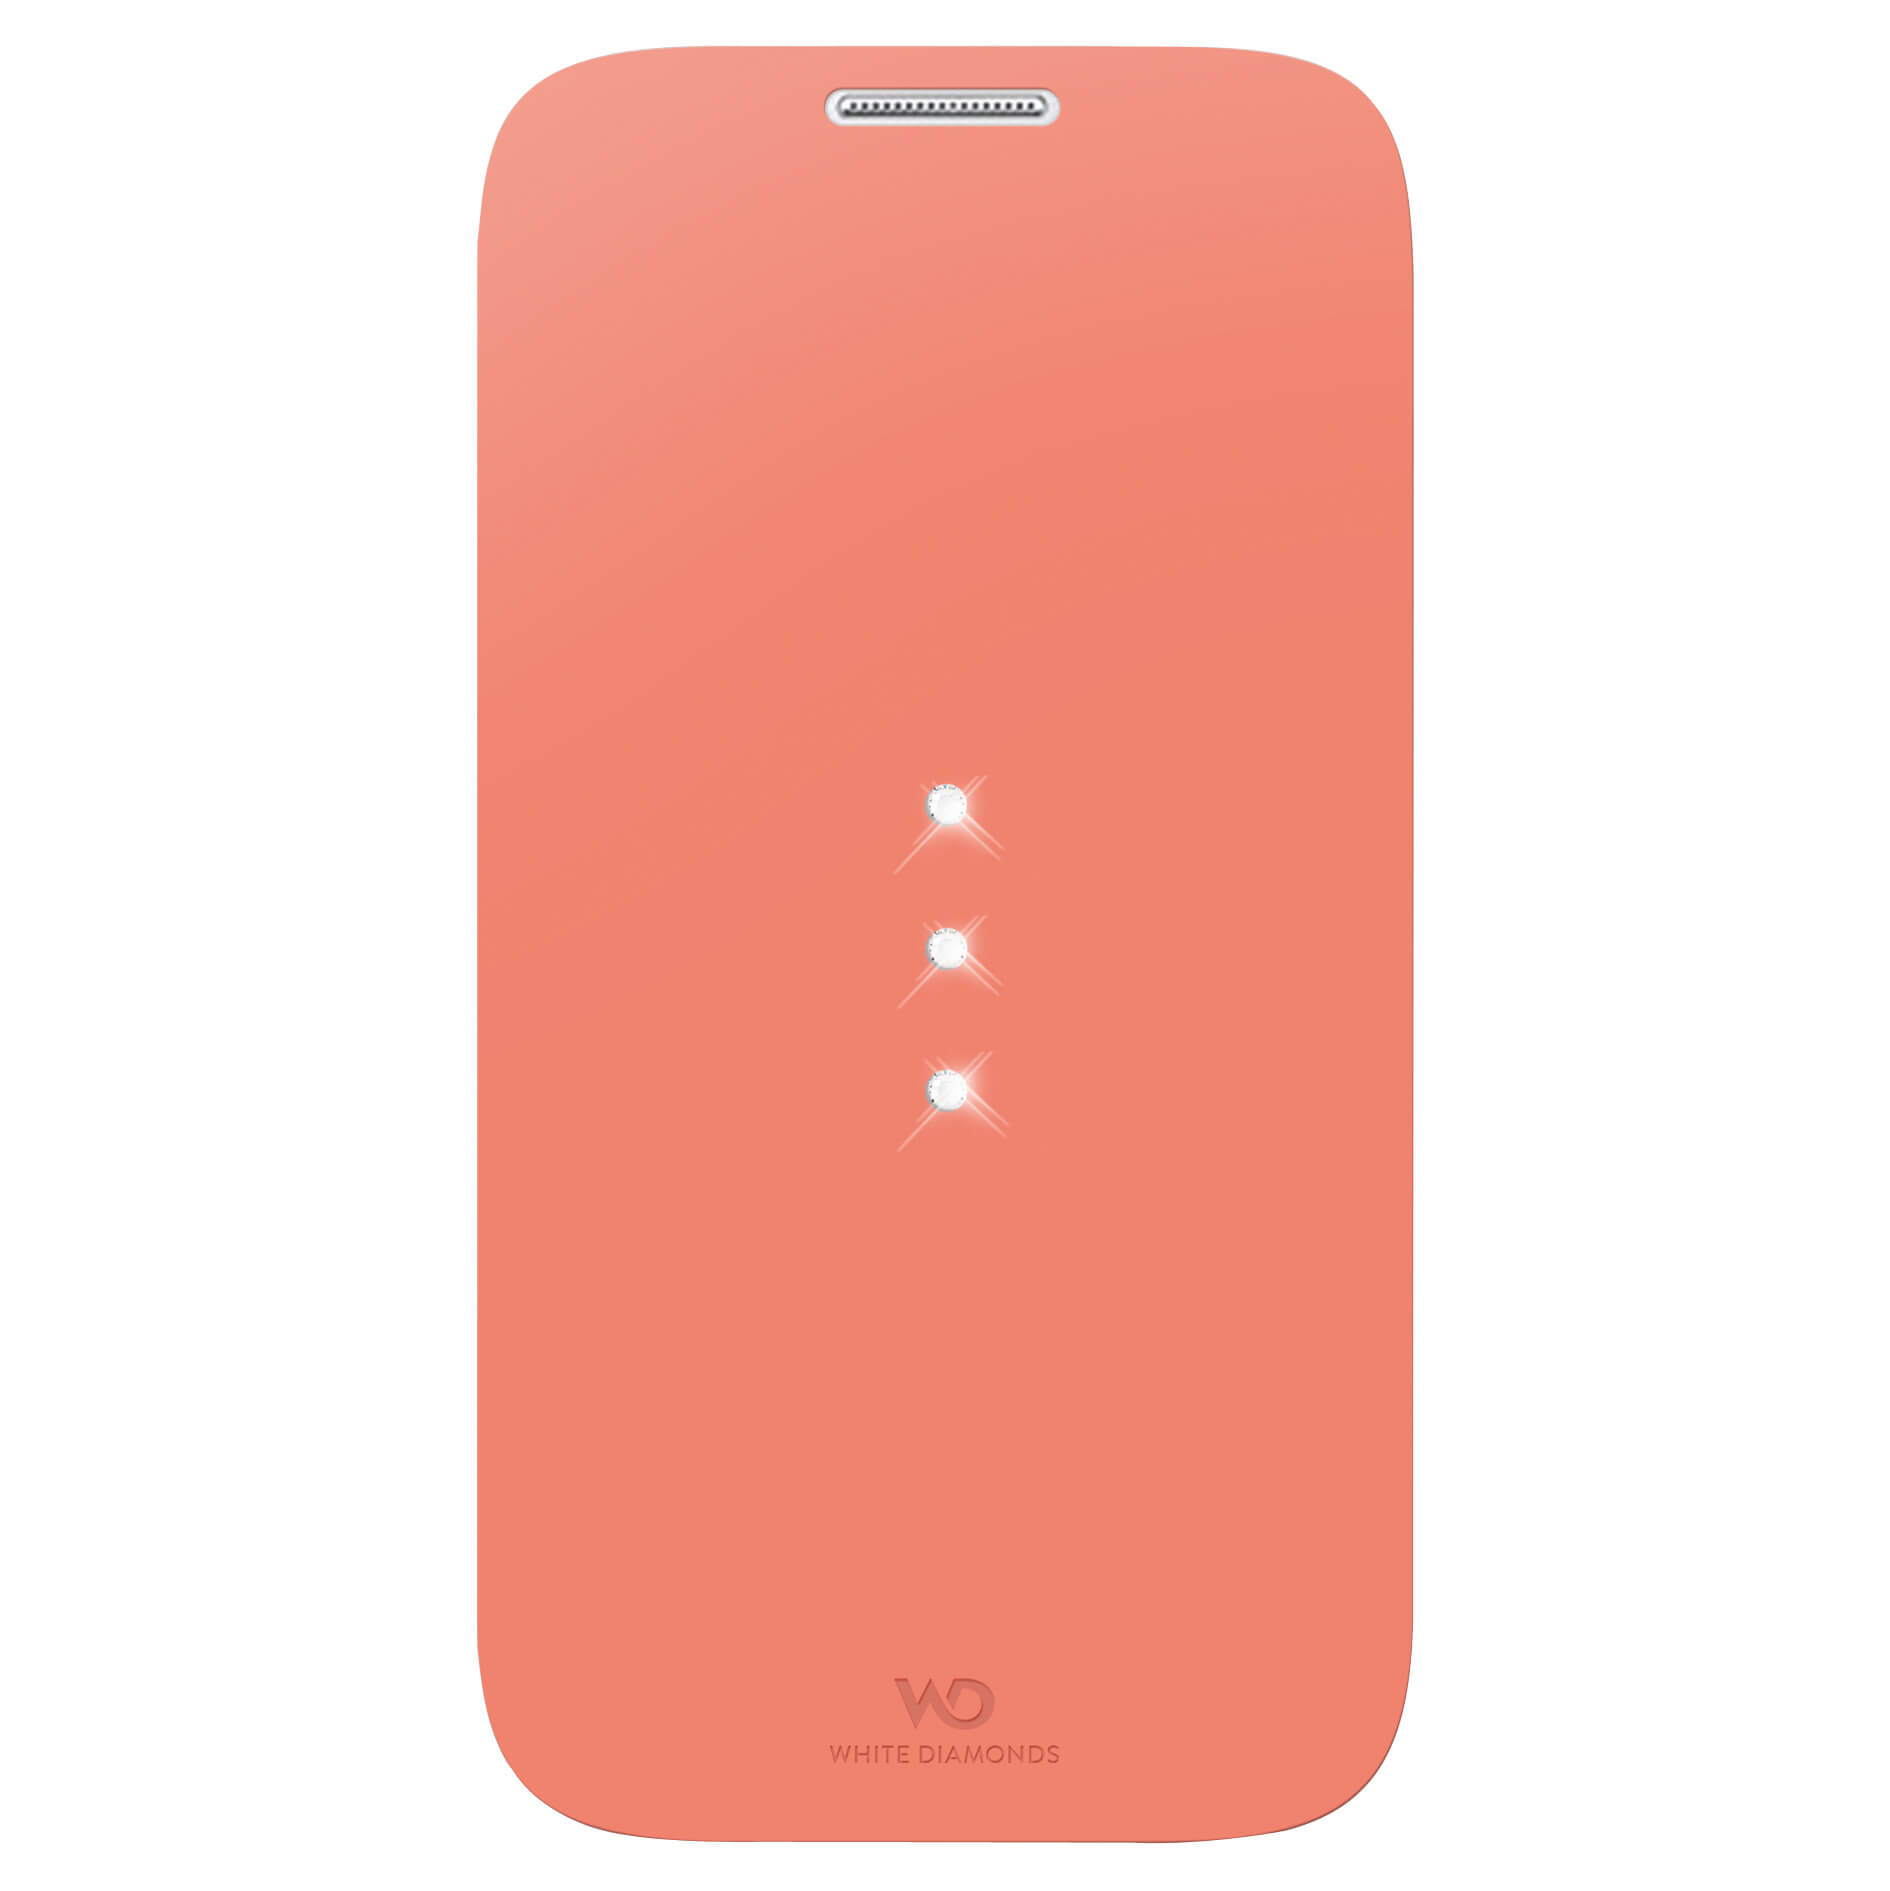 Crystal Booklet Case for Sams ung Galaxy S 4, coral